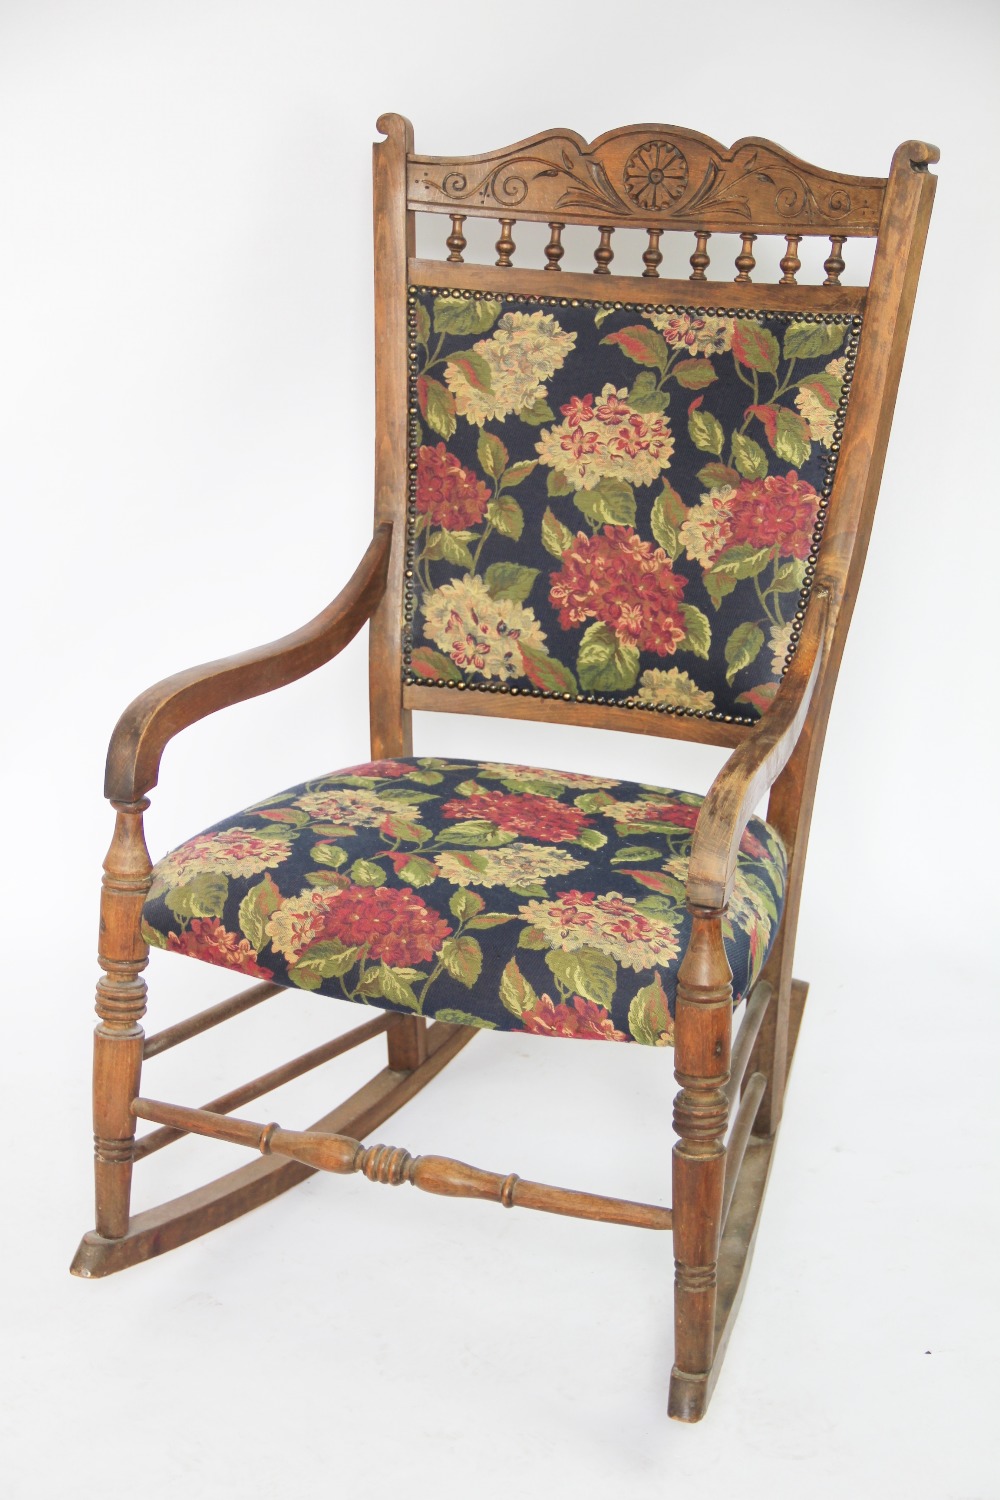 A late 19th century carved beech rocking chair, possibly American, with foliate floral upholstery,